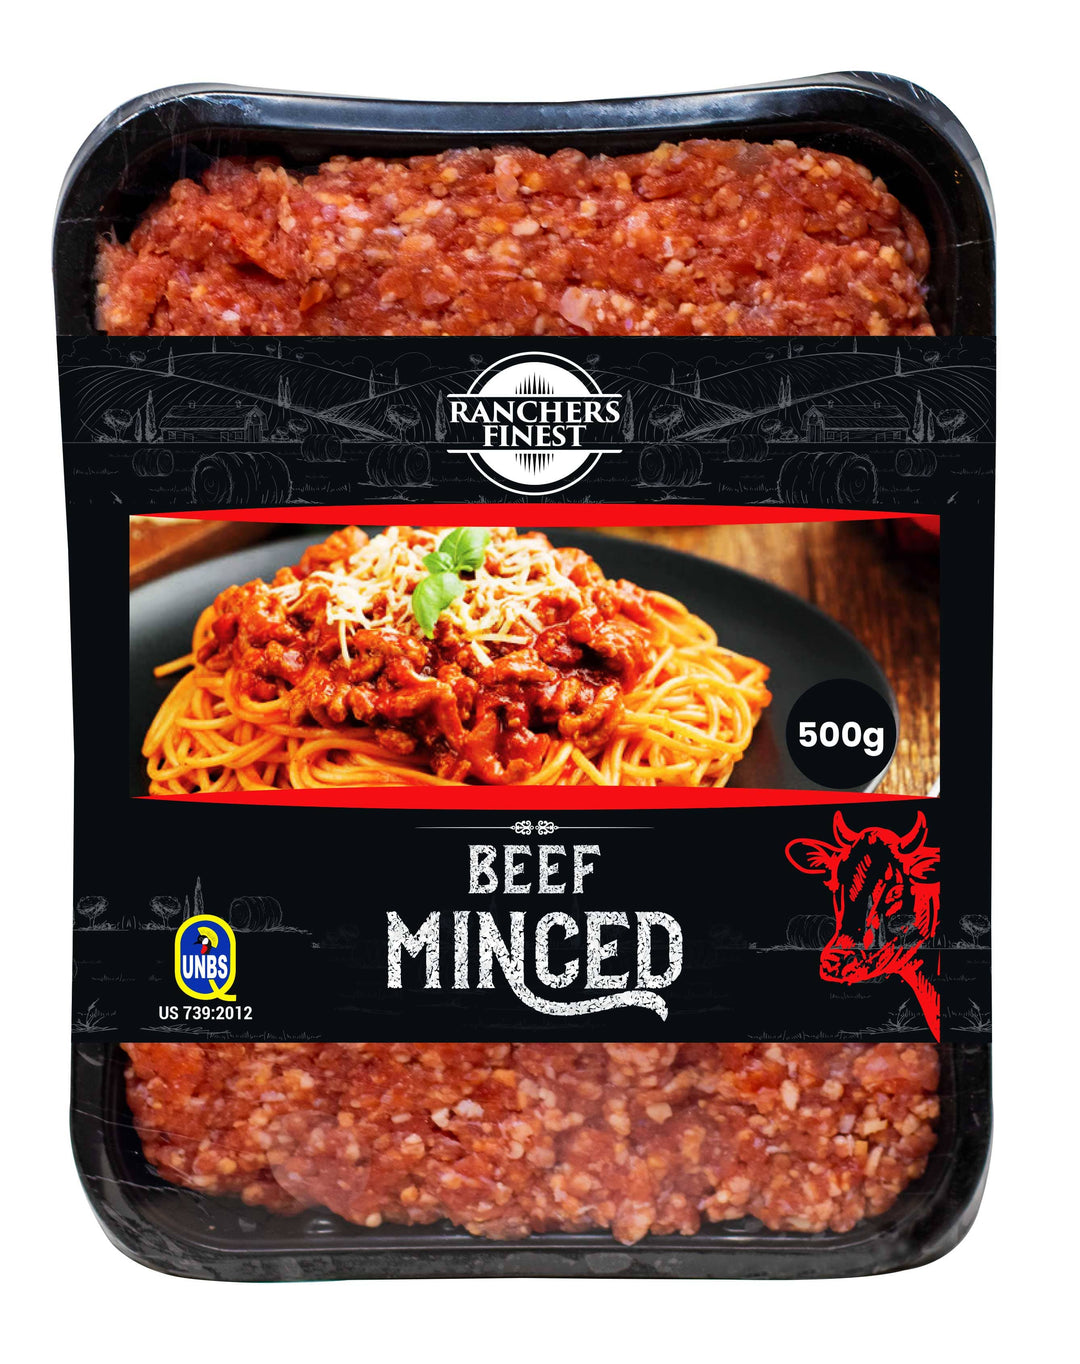 Ranchers Finest Minced Beef 500g